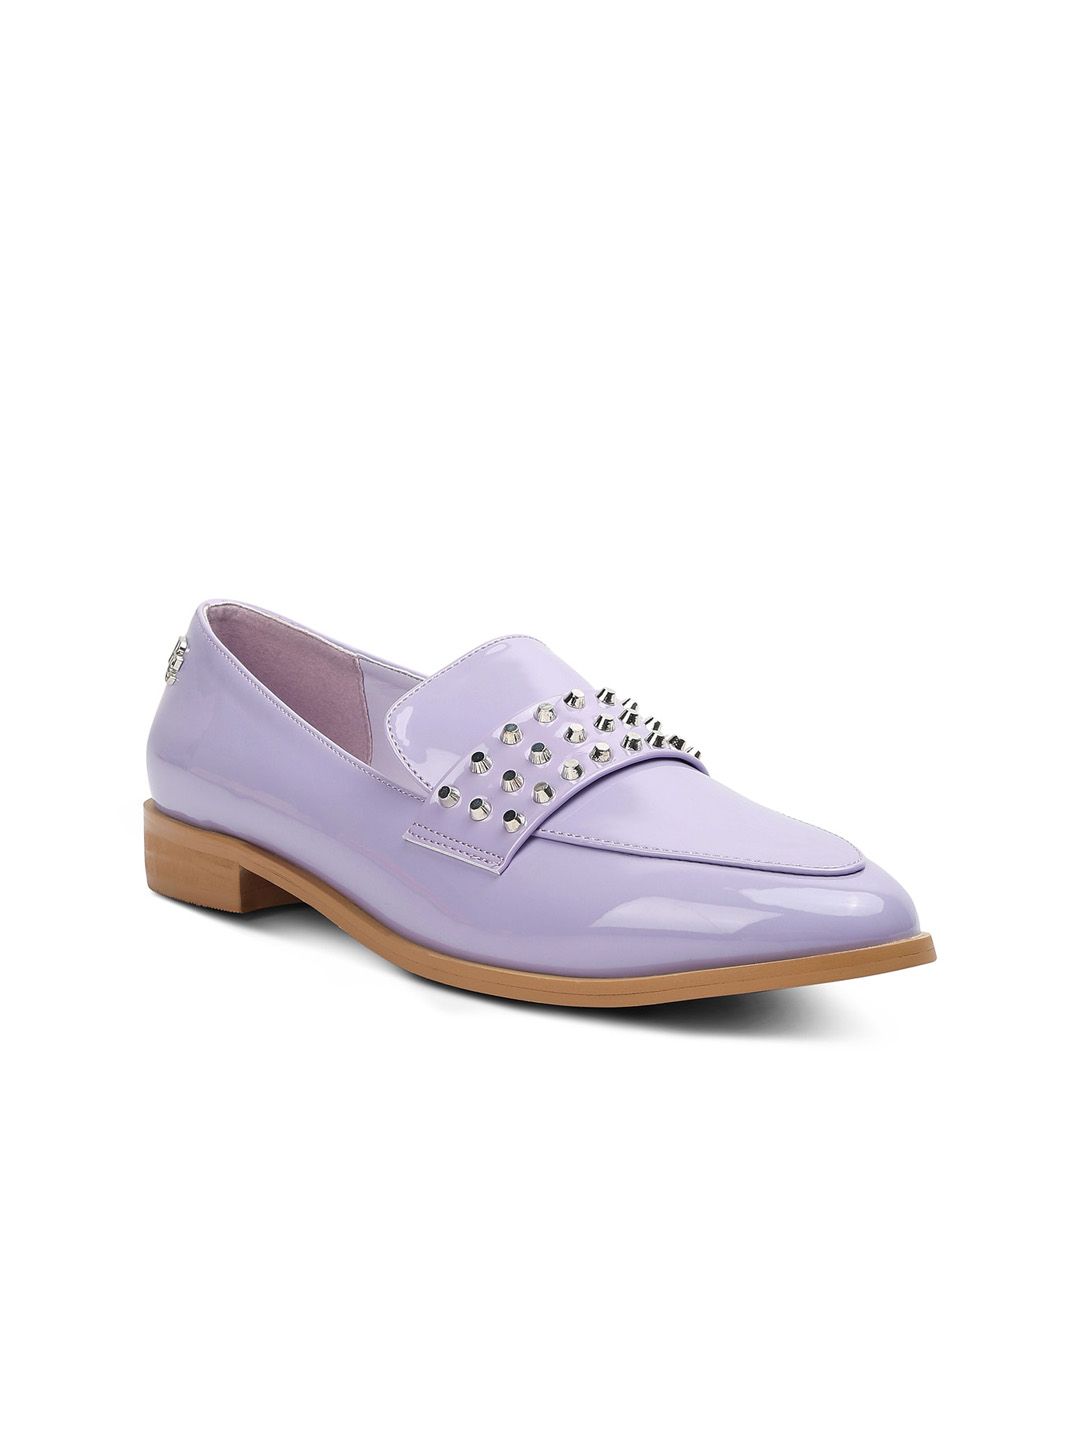 RAG & CO Women Stud Detail Slip-On Loafers Price in India